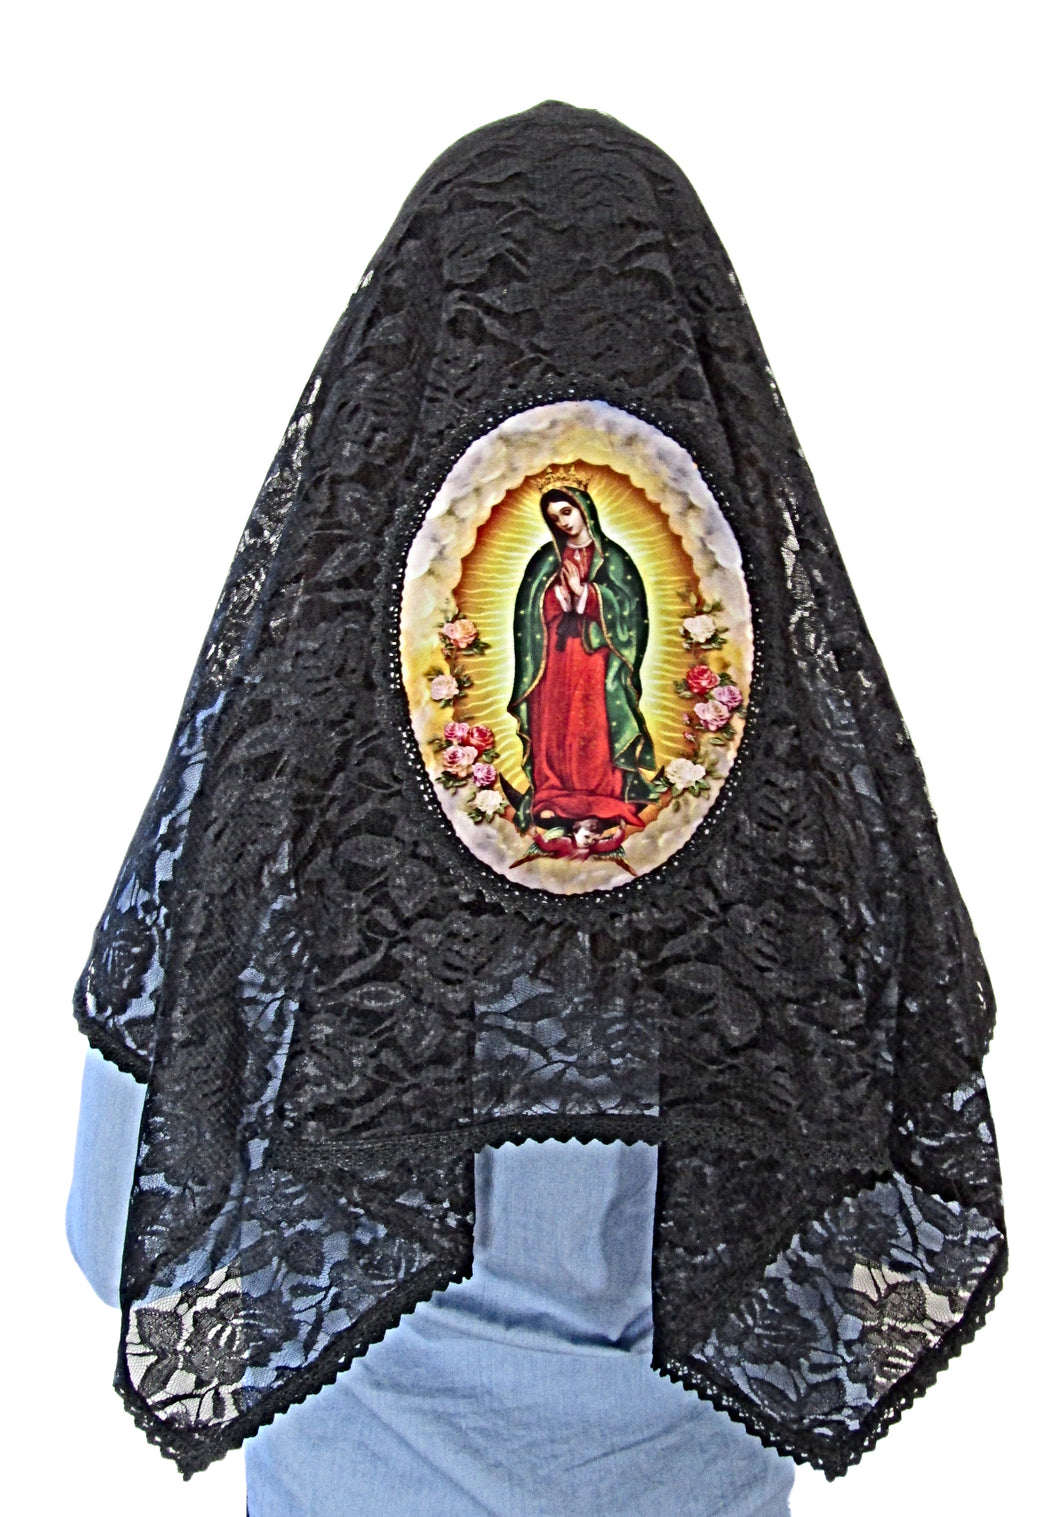 Our Lady's Mantilla by mds # 2110